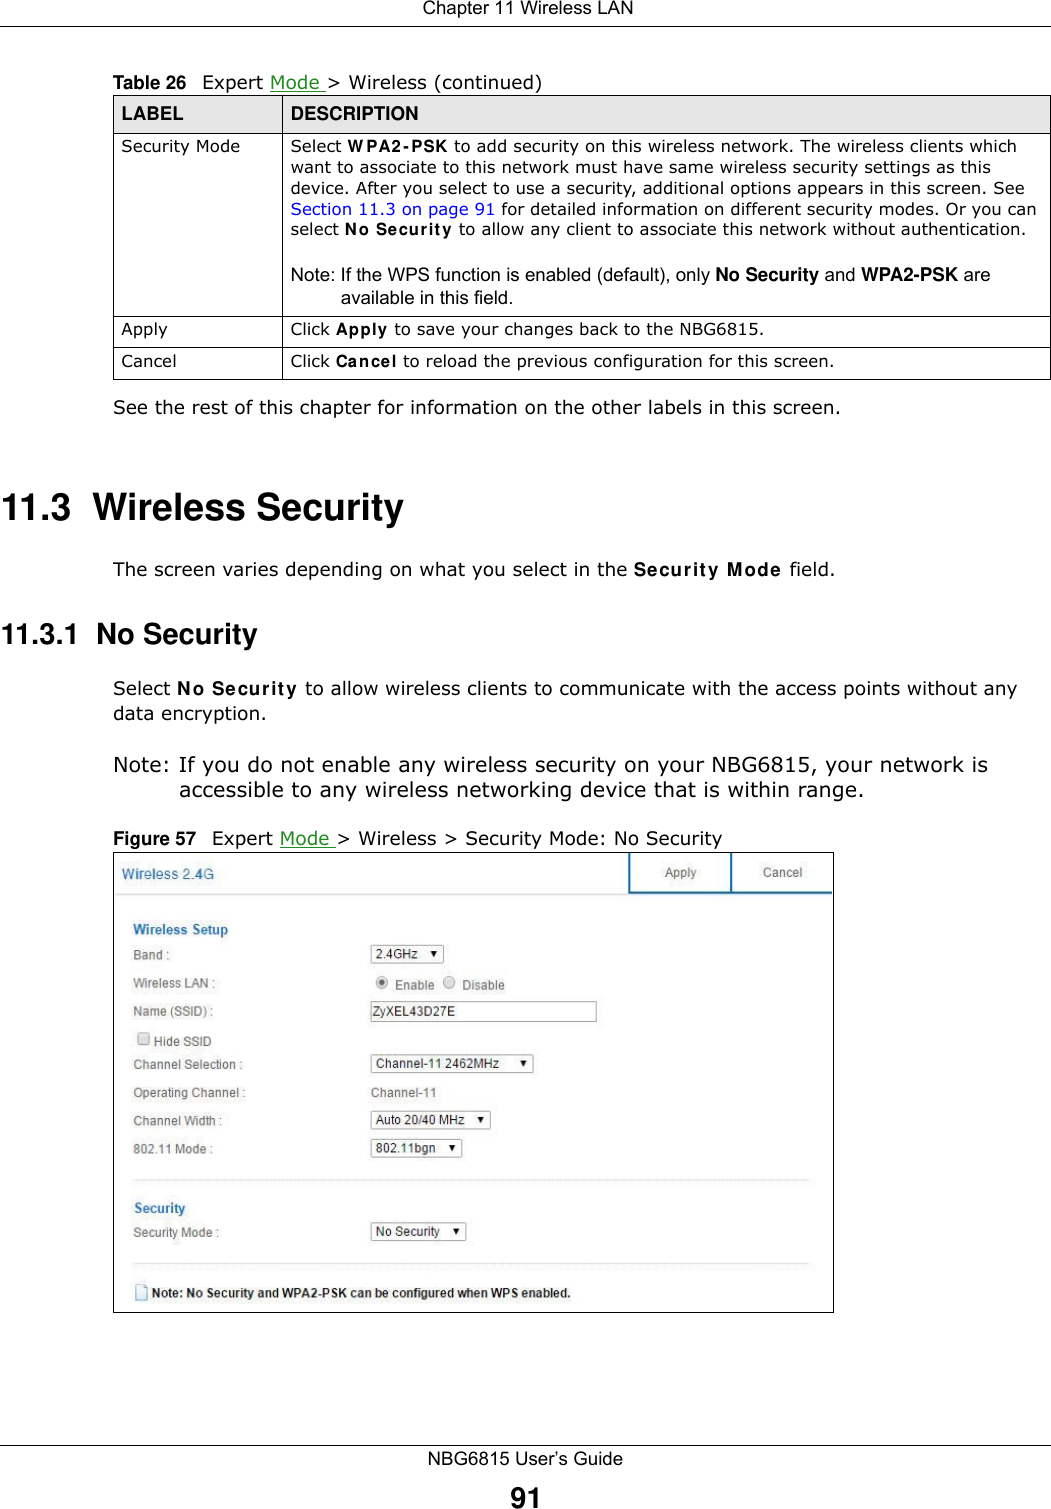  Chapter 11 Wireless LANNBG6815 User’s Guide91See the rest of this chapter for information on the other labels in this screen. 11.3  Wireless SecurityThe screen varies depending on what you select in the Security Mode field.11.3.1  No SecuritySelect No Security to allow wireless clients to communicate with the access points without any data encryption.Note: If you do not enable any wireless security on your NBG6815, your network is accessible to any wireless networking device that is within range.Figure 57   Expert Mode &gt; Wireless &gt; Security Mode: No SecuritySecurity Mode Select WPA2-PSK to add security on this wireless network. The wireless clients which want to associate to this network must have same wireless security settings as this device. After you select to use a security, additional options appears in this screen. See Section 11.3 on page 91 for detailed information on different security modes. Or you can select No Security to allow any client to associate this network without authentication.Note: If the WPS function is enabled (default), only No Security and WPA2-PSK are available in this field.Apply Click Apply to save your changes back to the NBG6815.Cancel Click Cancel to reload the previous configuration for this screen.Table 26   Expert Mode &gt; Wireless (continued) LABEL DESCRIPTION